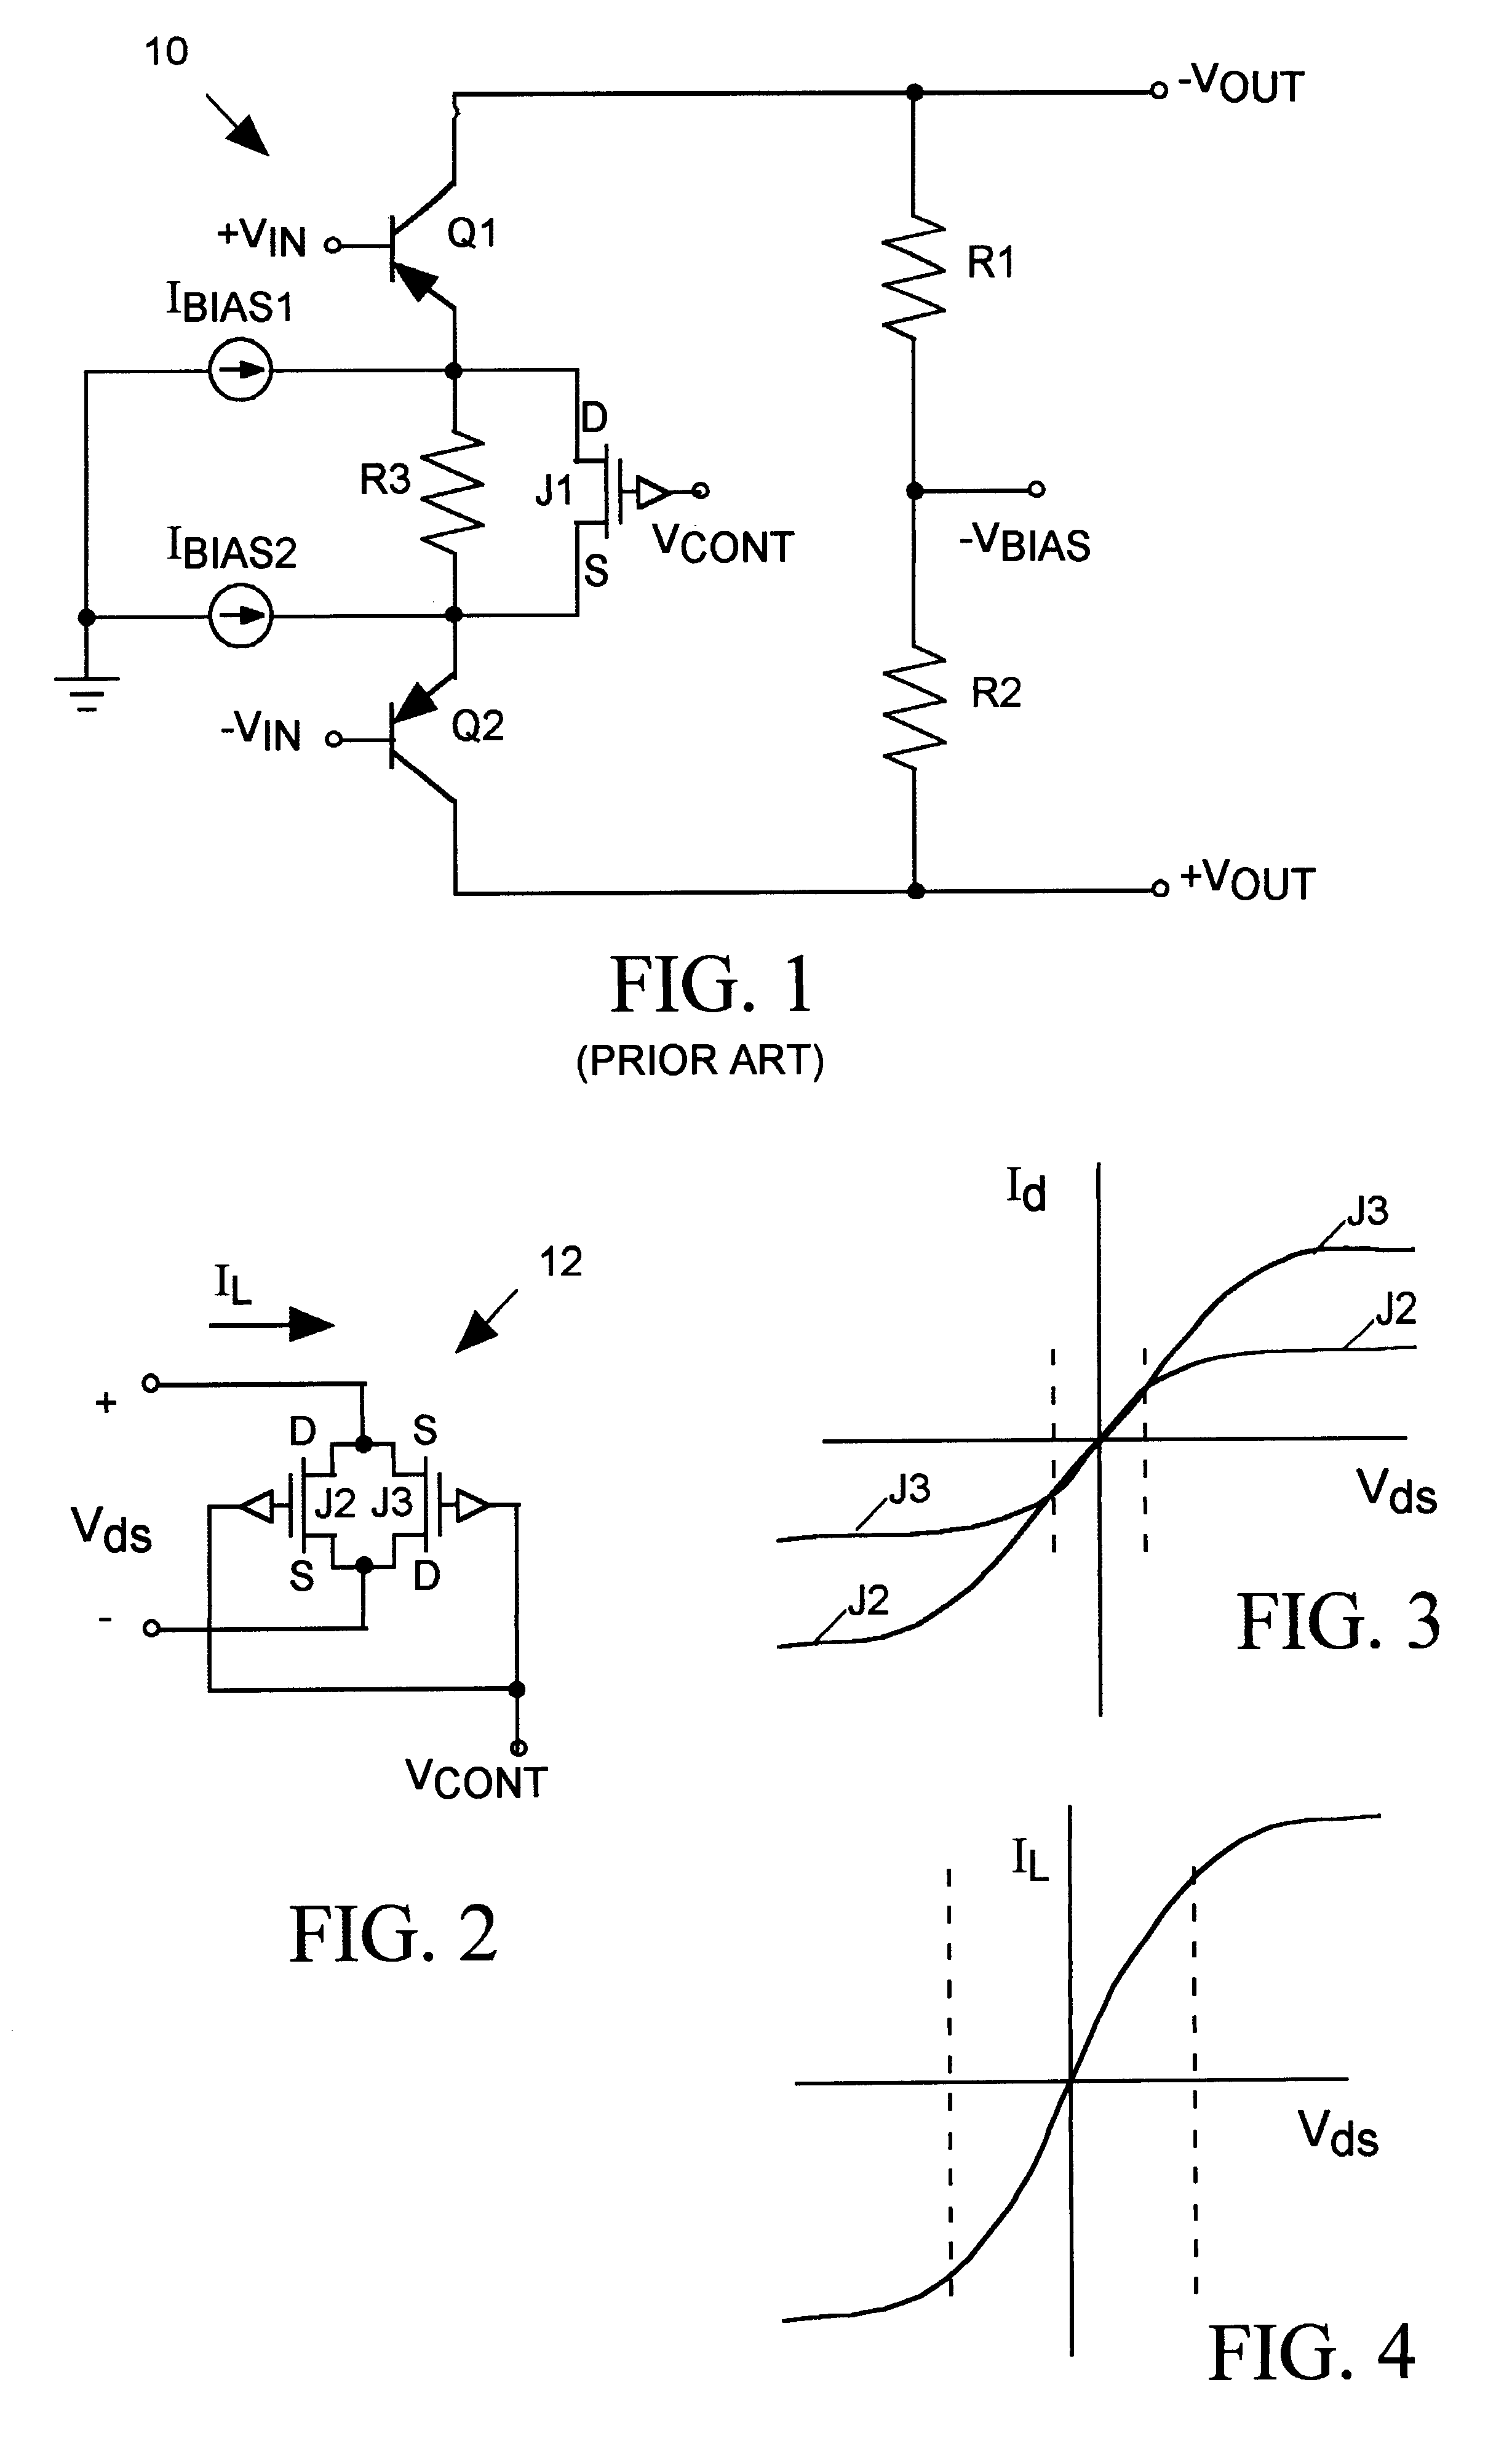 FET-based, linear voltage-controlled resistor for wide-band gain control circuit